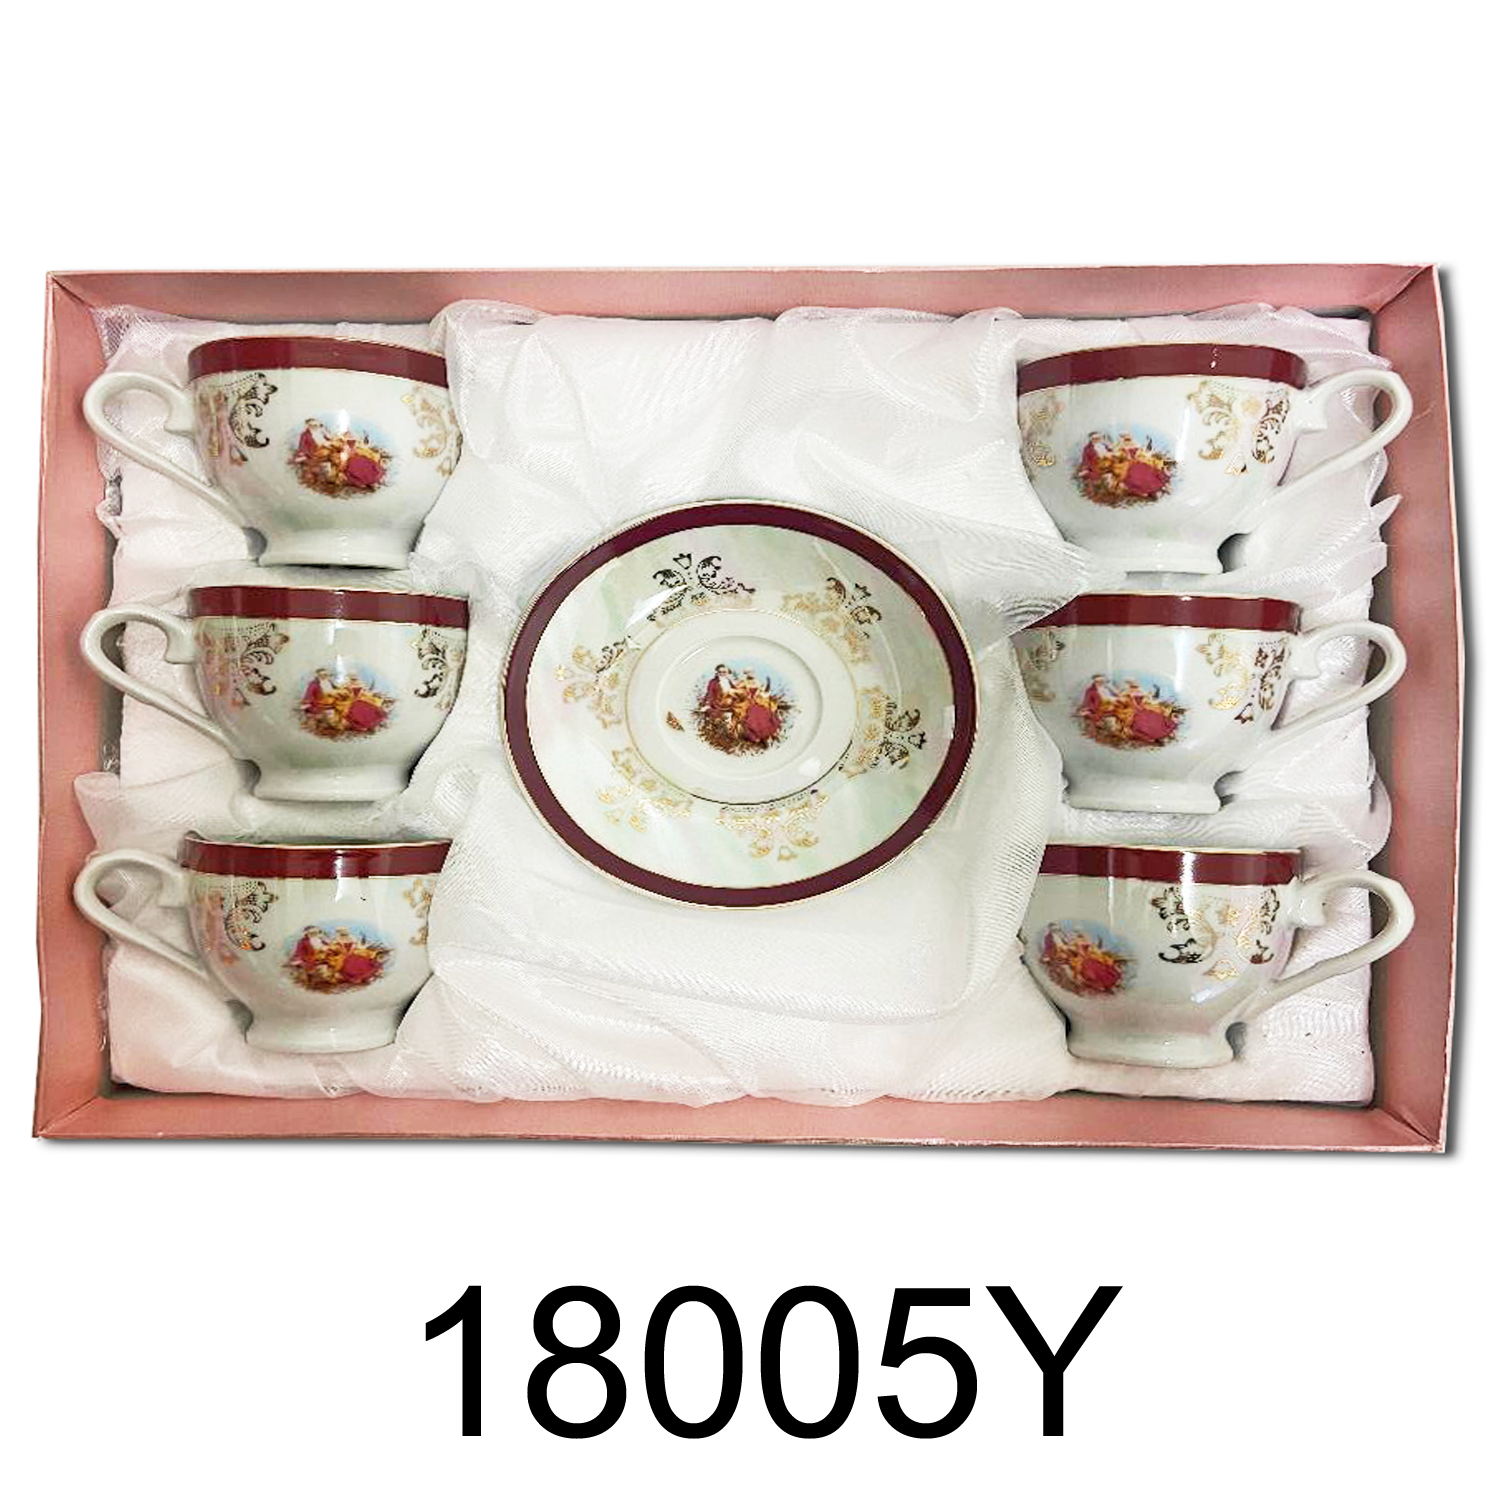 12 Beautiful Tea Set Cups with Images